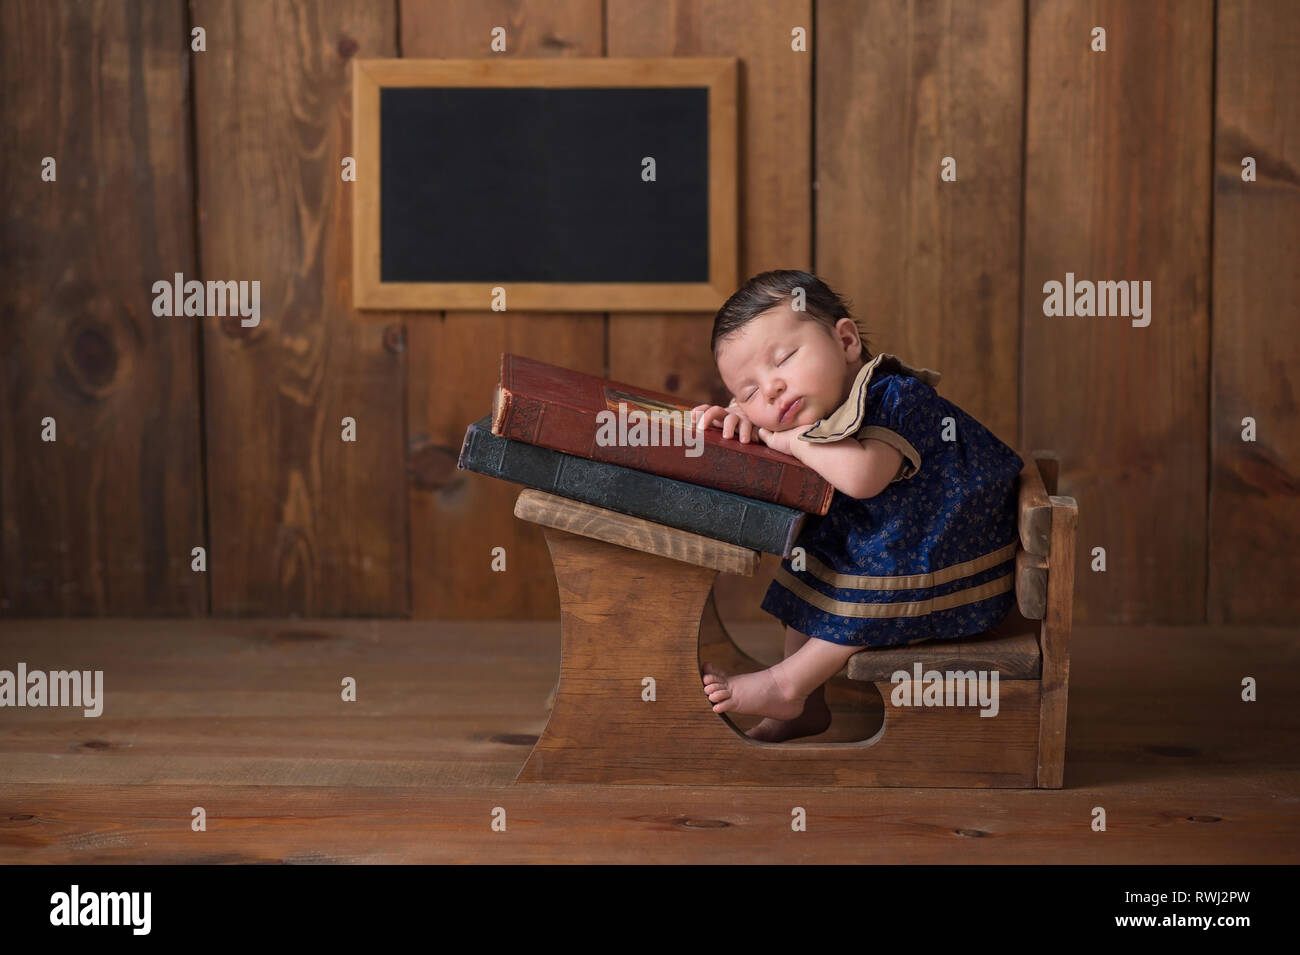 One week old newborn baby girl wearing a dress and sleeping on a stack of vintage books at a tiny school desk. Stock Photo